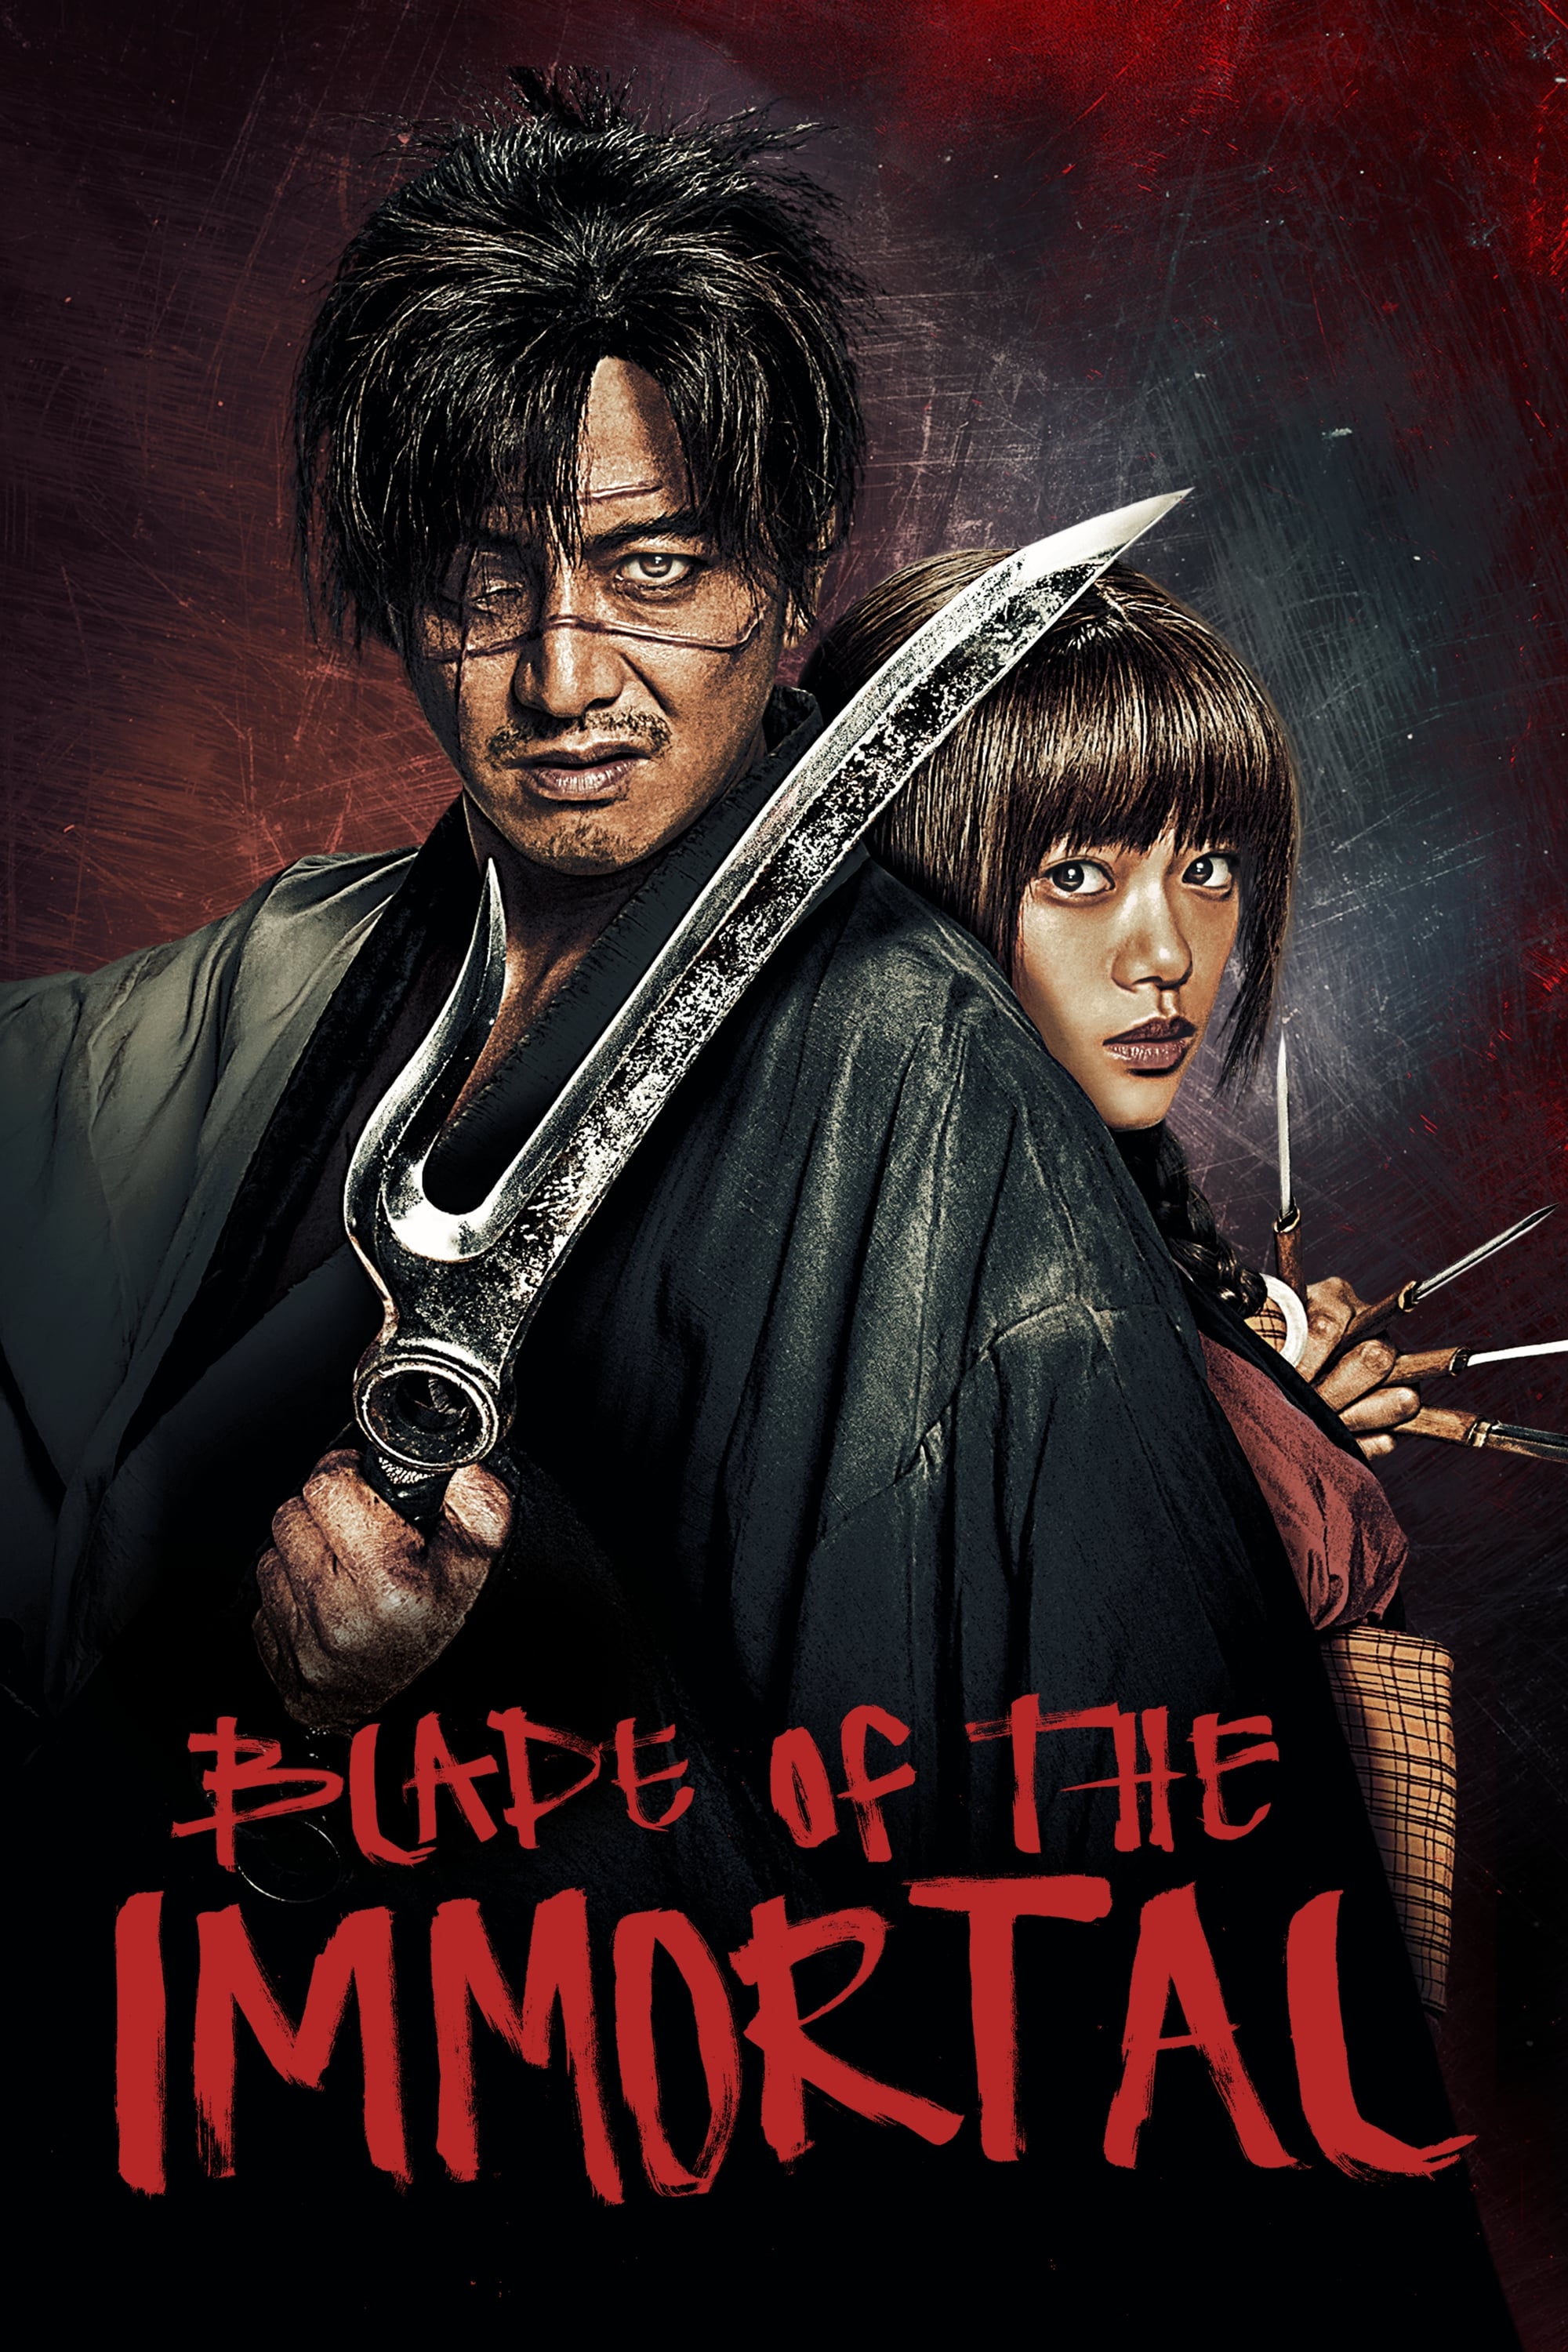 Blade of the Immortal (2017) - The Movie